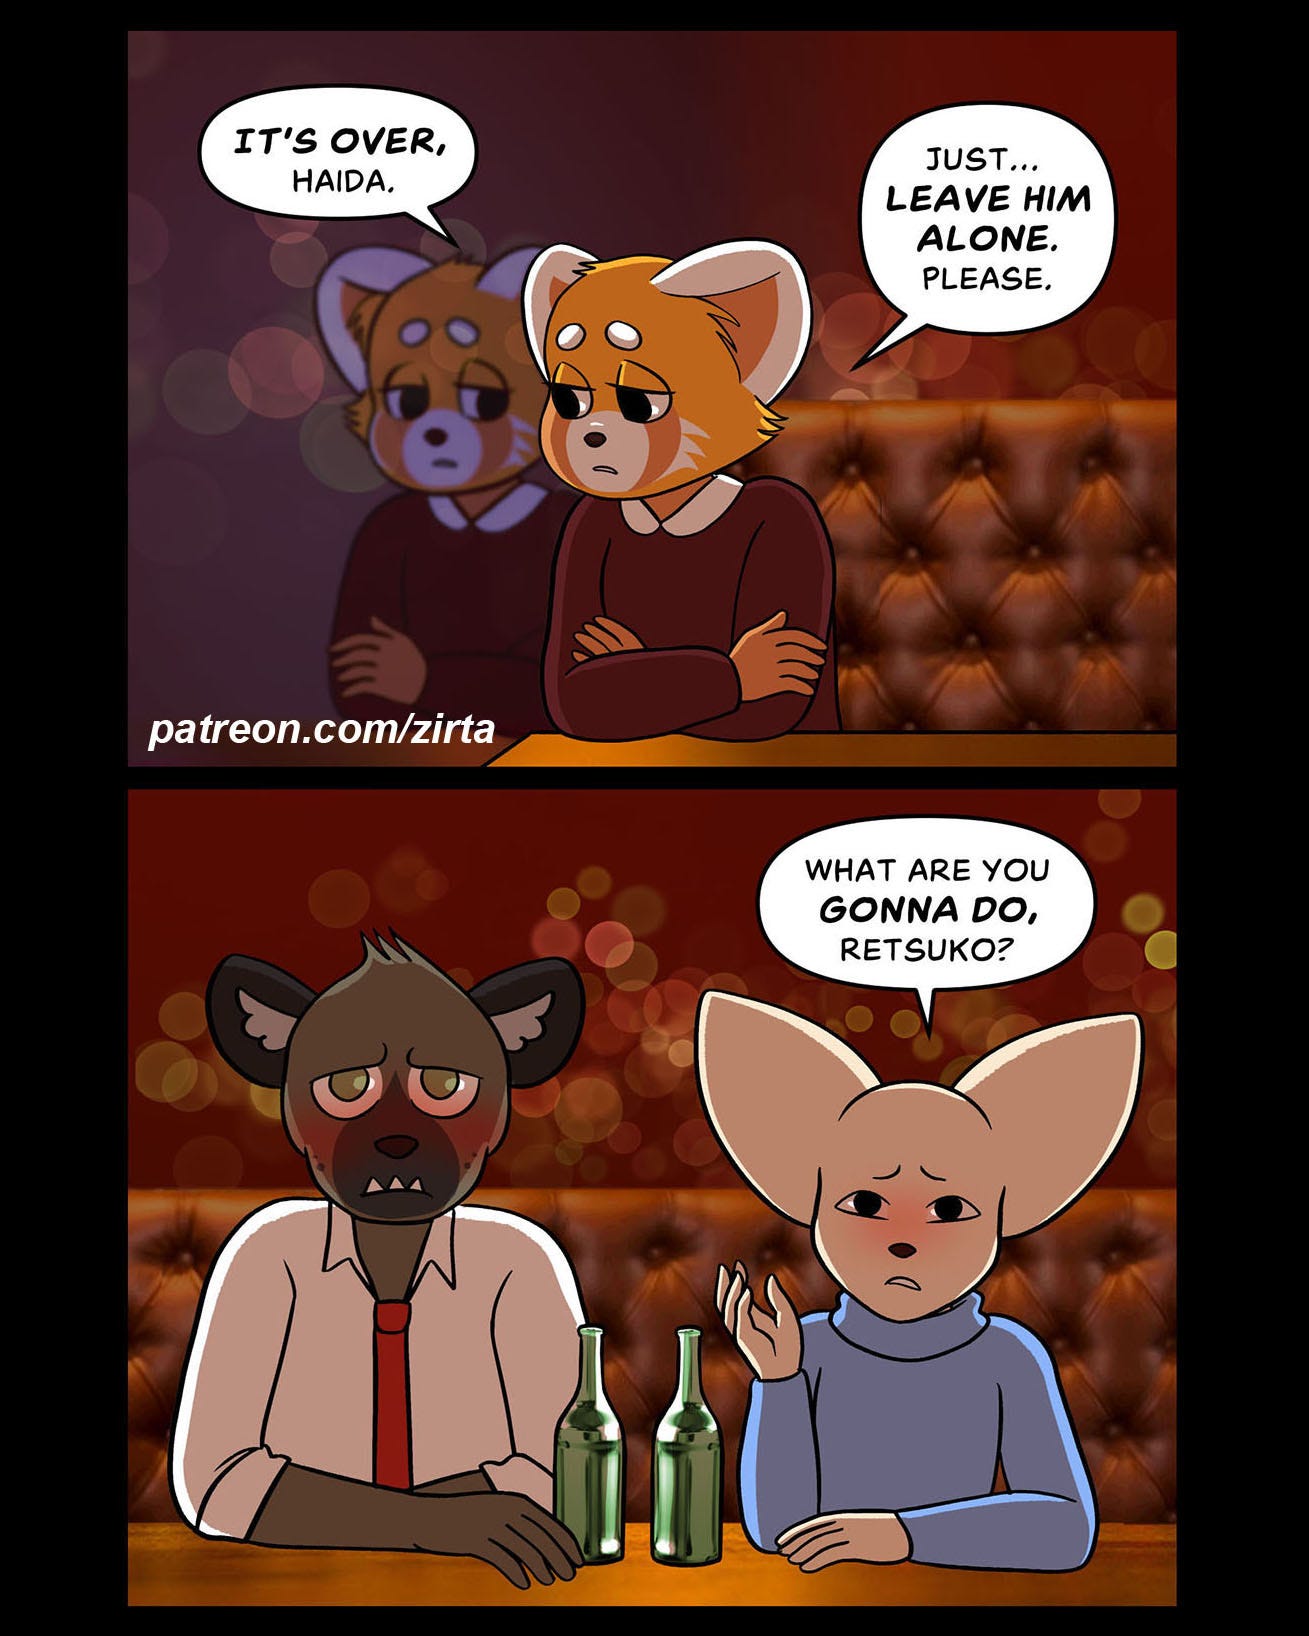 May be an image of slow loris, red panda and text that says 'IT'S OVER, HAIDA, JUST... LEAVE HIM ALONE. PLEASE, patreon.com/zirta WHAT ARE YOU GONNA DO, RETSUKO?'